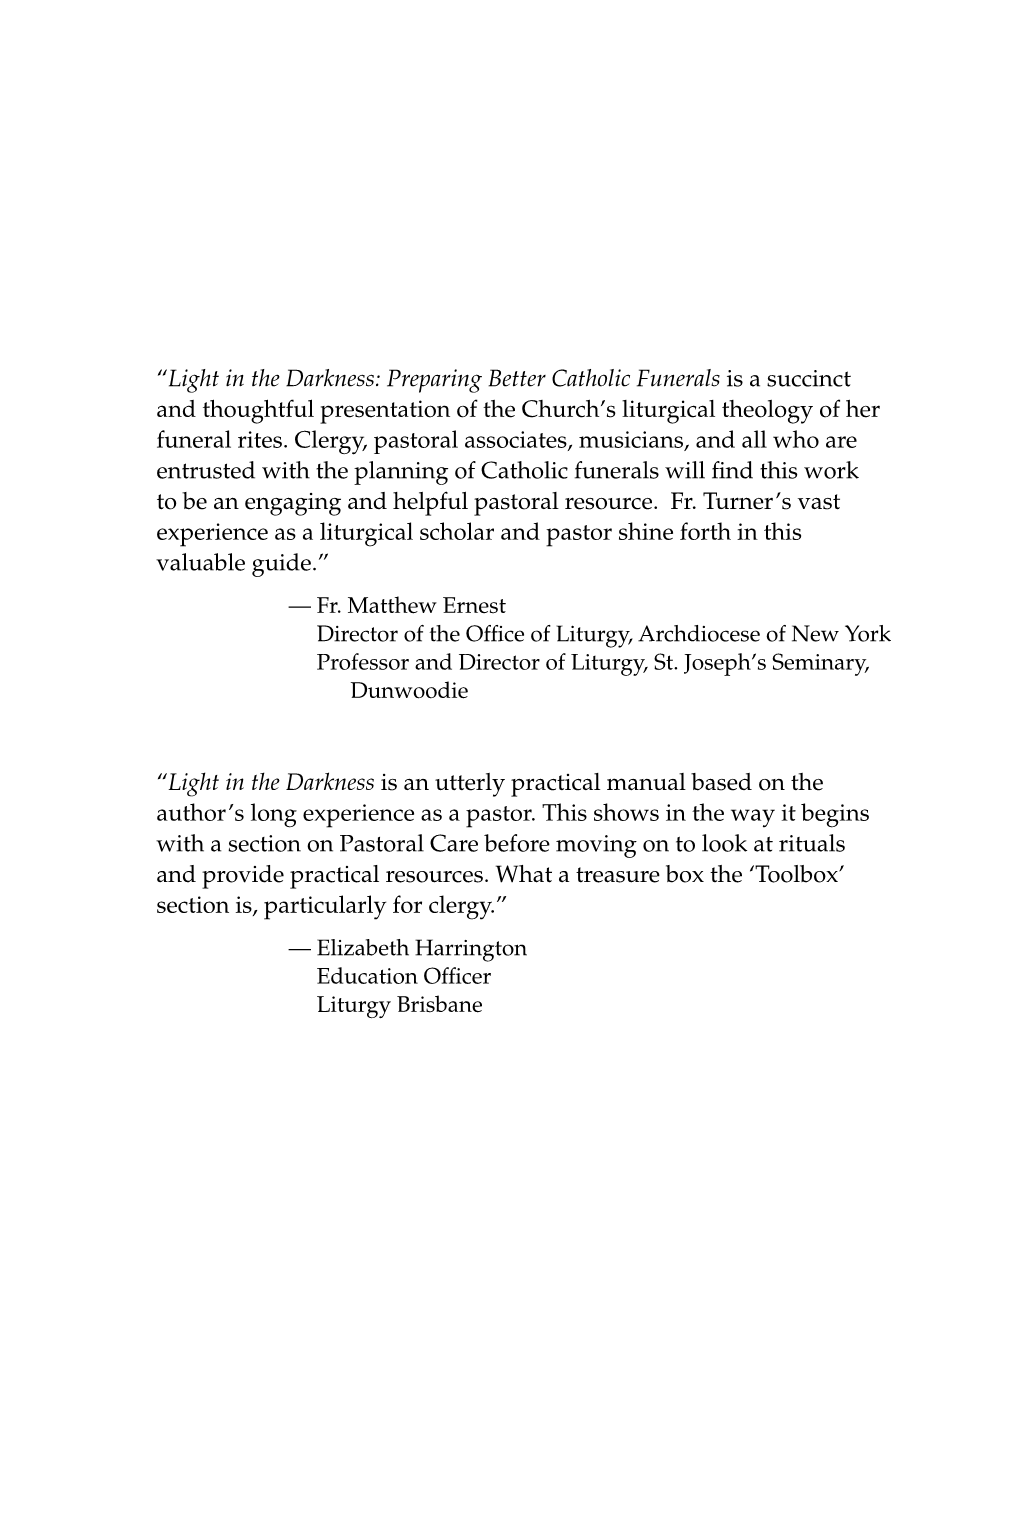 Light in the Darkness: Preparing Better Catholic Funerals Is a Succinct and Thoughtful Presentation of the Church’S Liturgical Theology of Her Funeral Rites